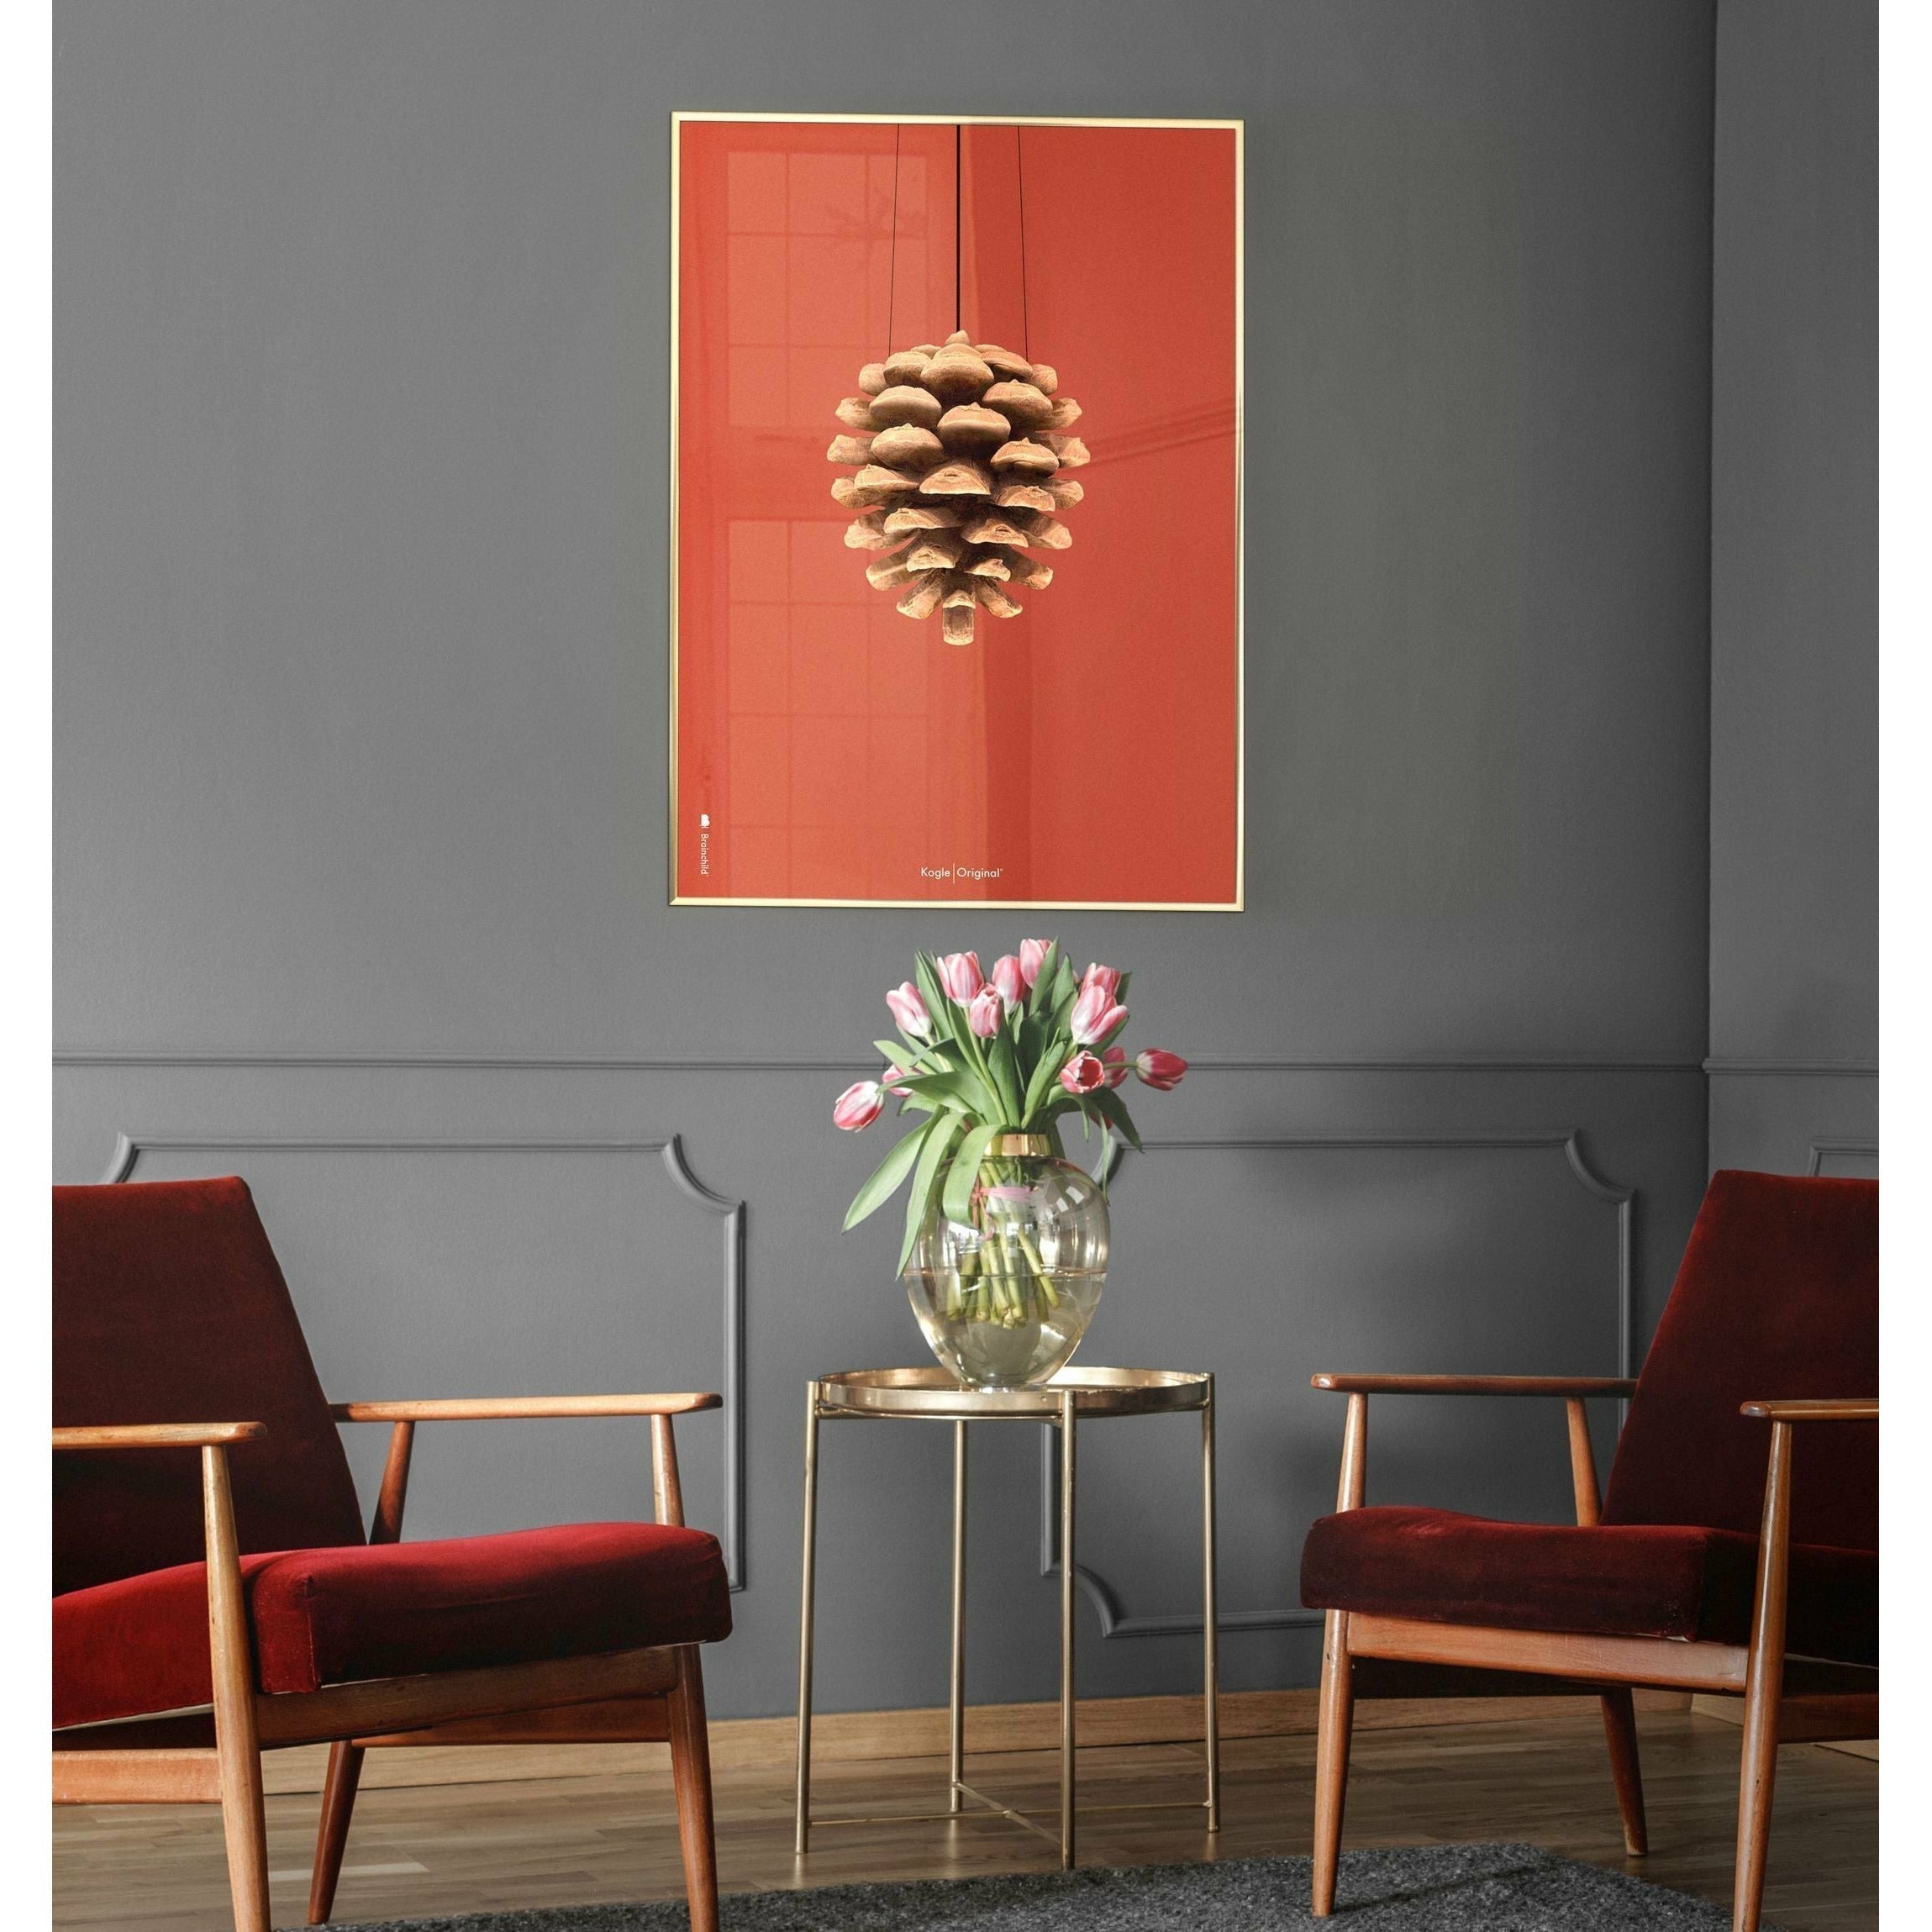 brainchild Pine Cone Classic Poster, Frame in Black Lacquered Wood A5, Red Baggrund